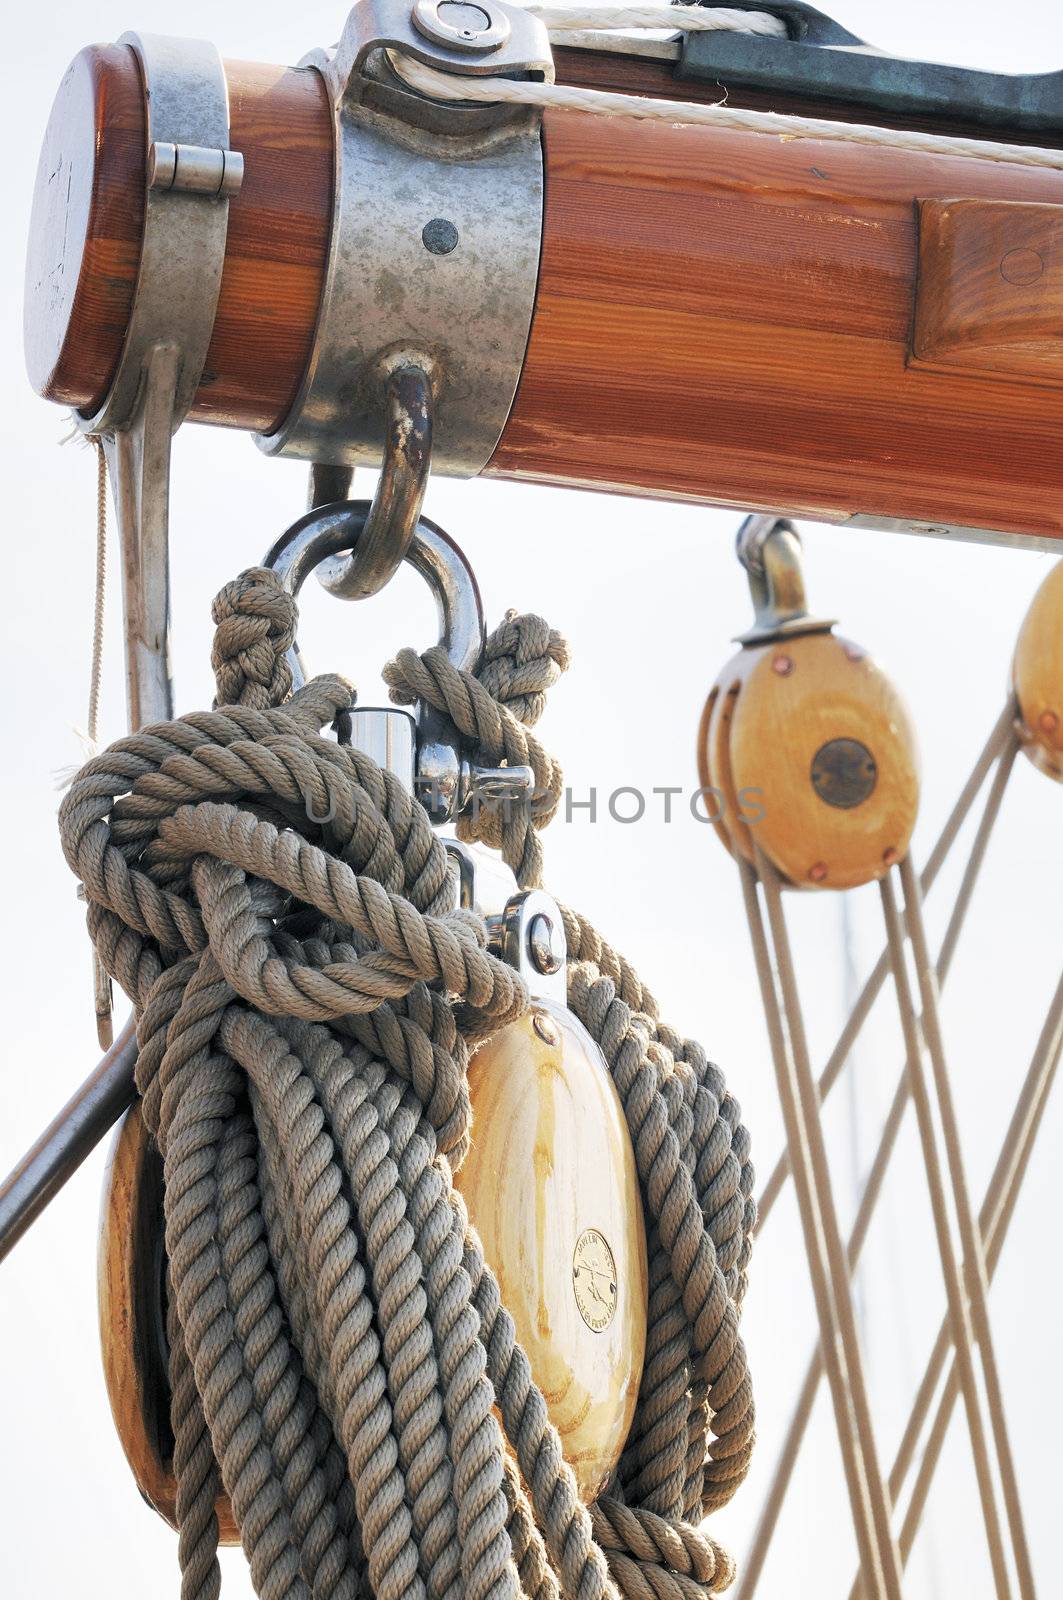 Wooden boom with blocks and ropes on a sailboat